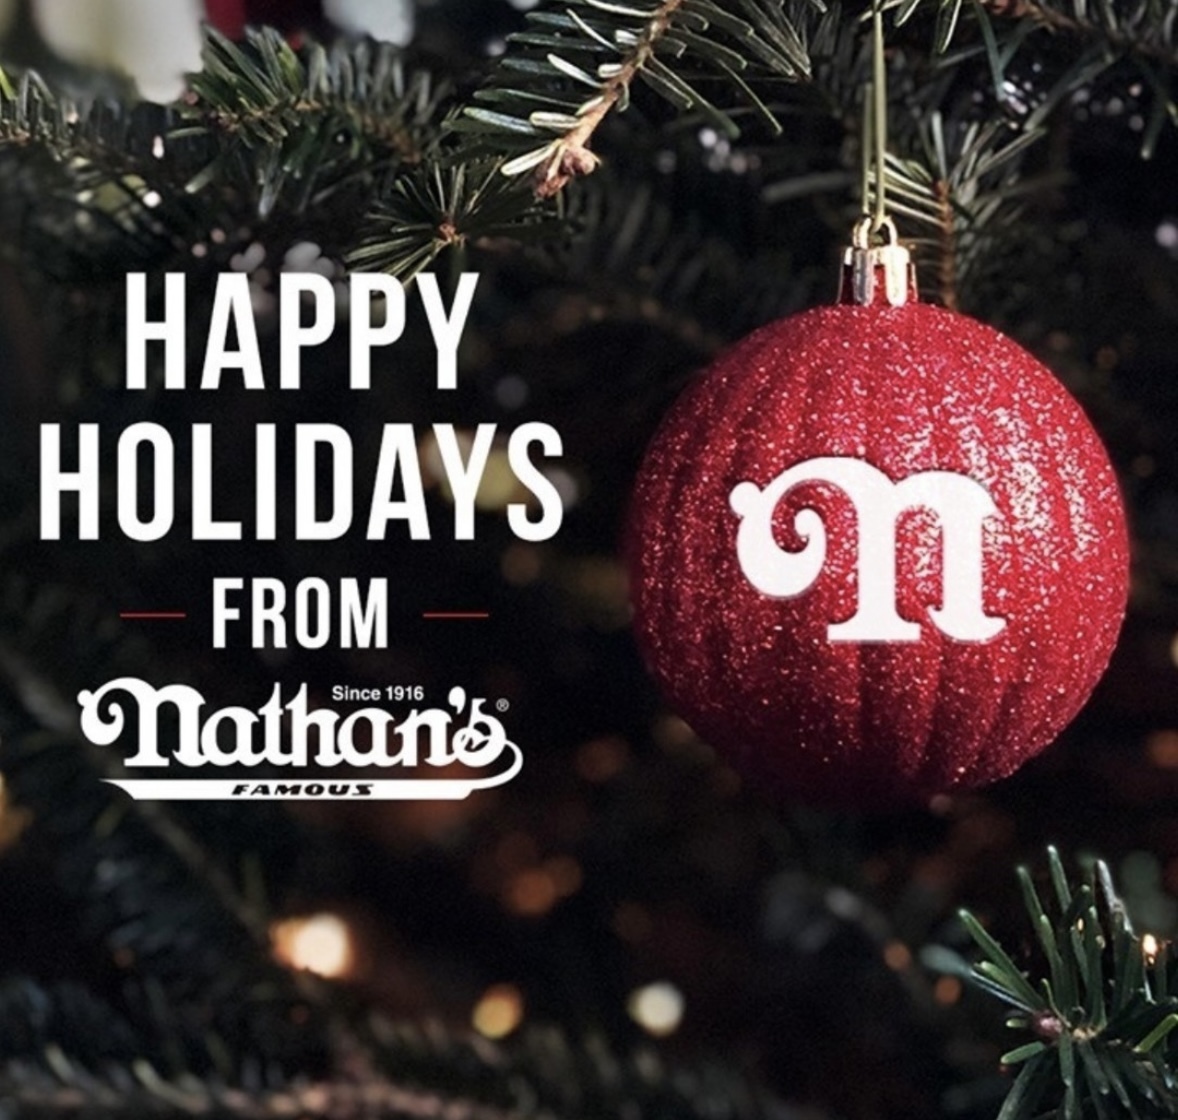 Wishing the best Holiday Season to your family from ours!